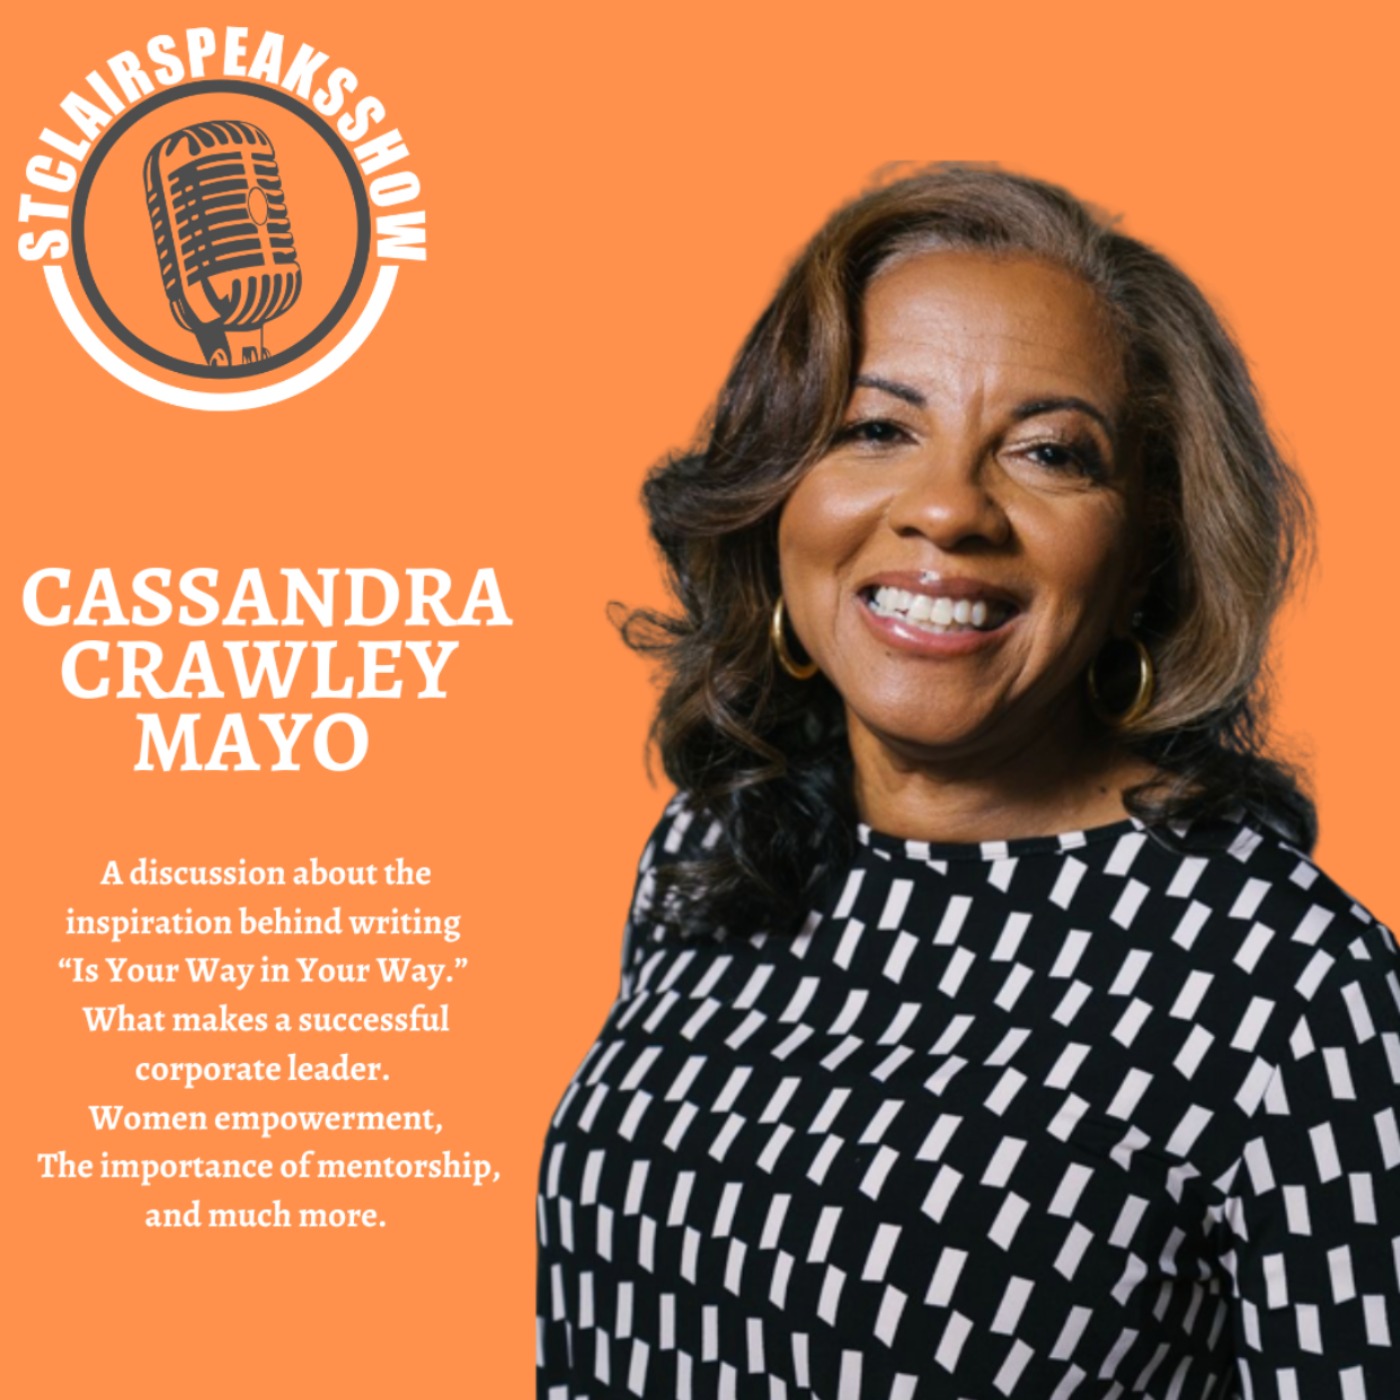 The StclairSpeaksShow featuring Cassandra Crawley Mayo Image